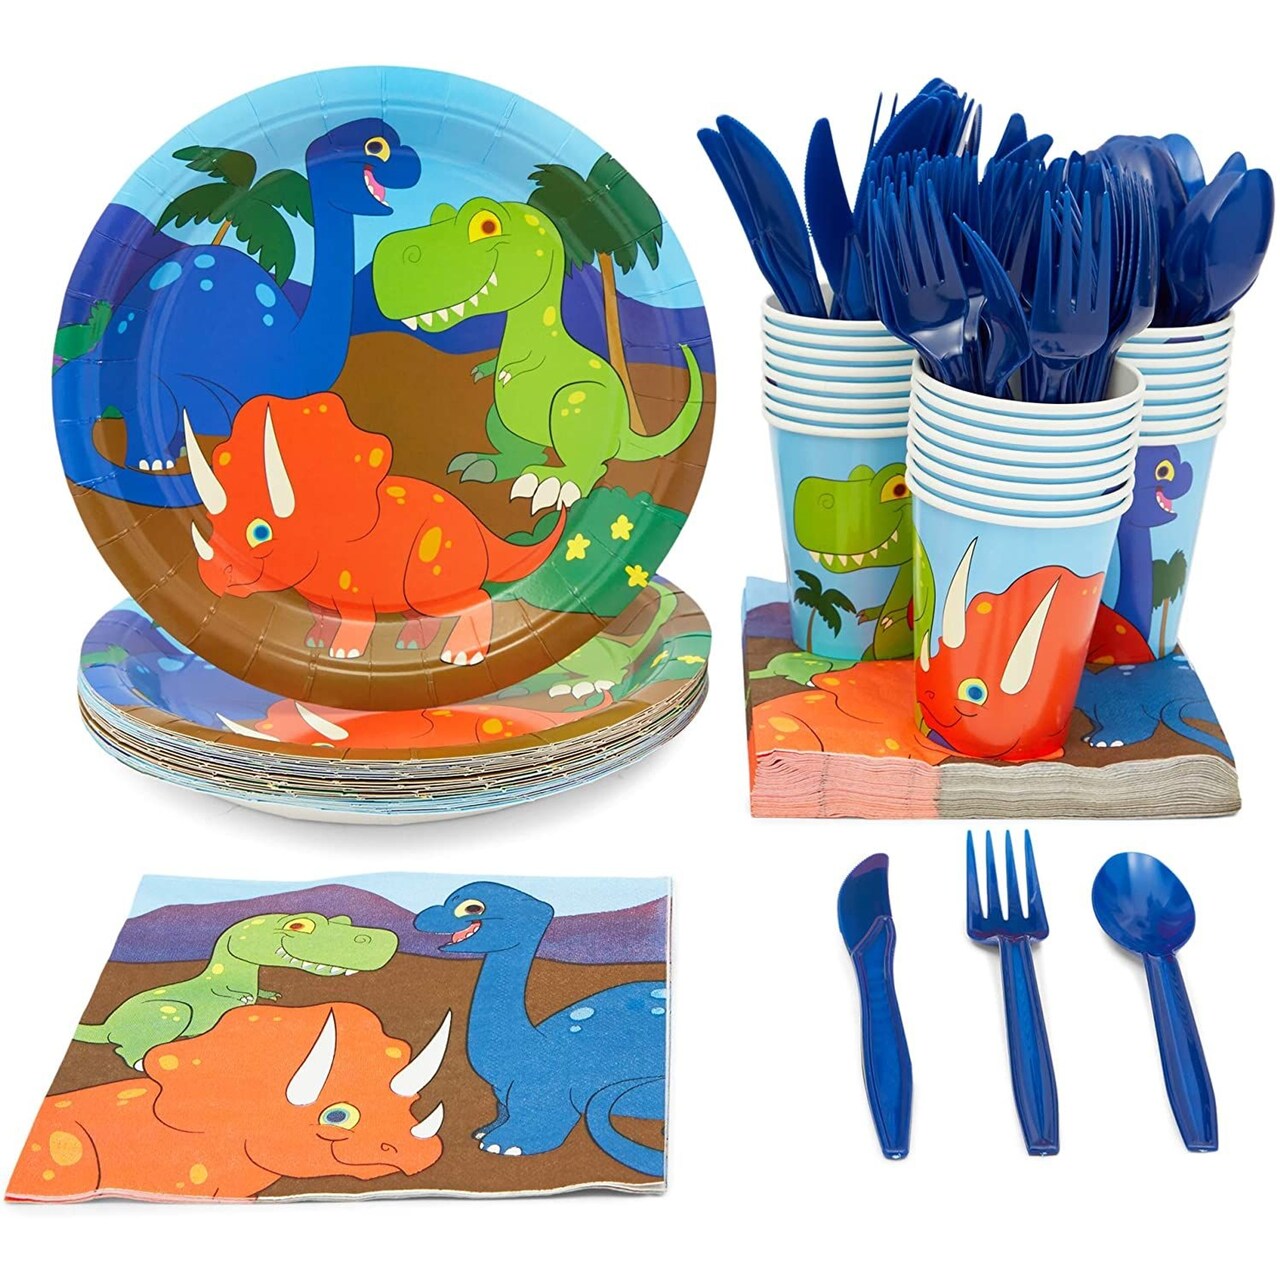 144 Pieces Dinosaur Birthday Party Supplies with Plates, Knives